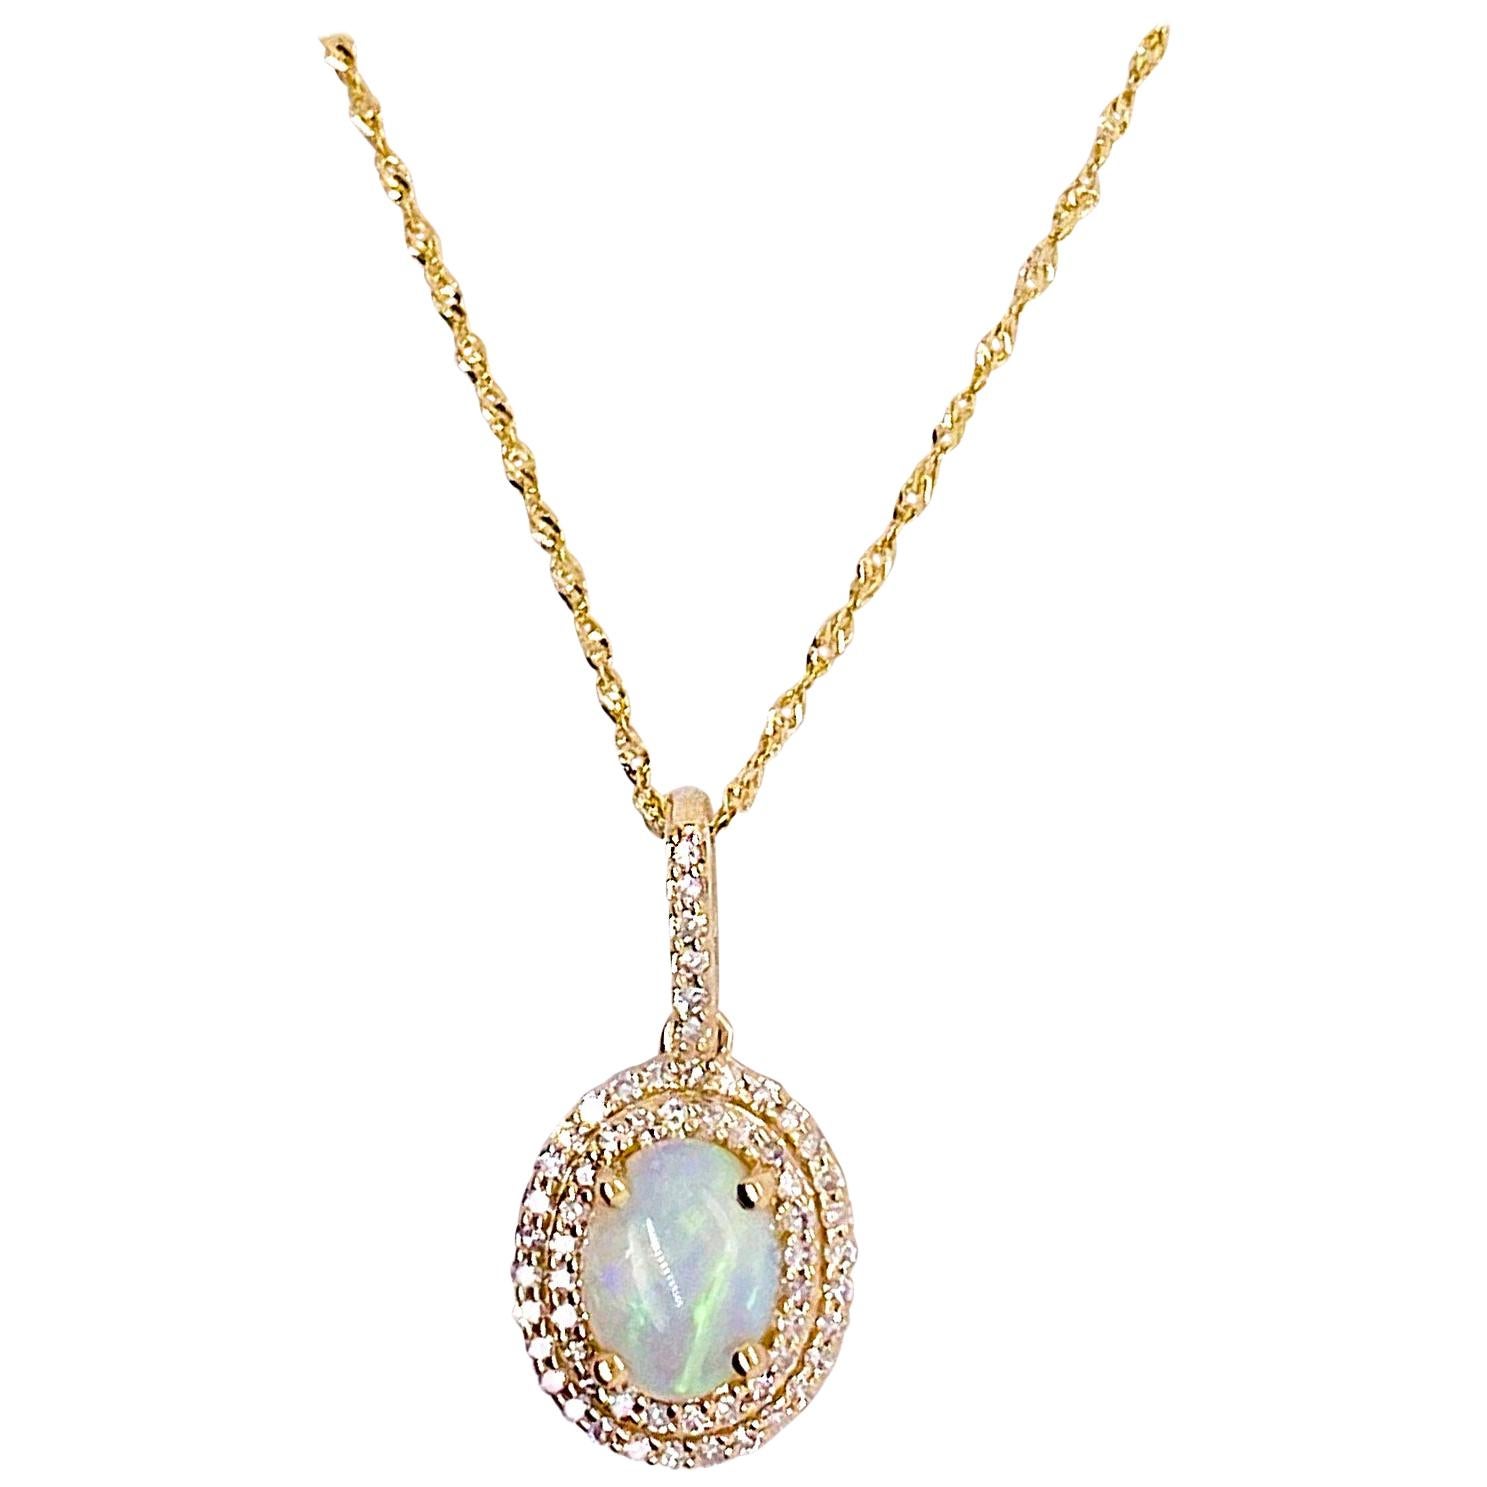 Opal Diamond Necklace, Double Halo Opal Pendant, Yellow Gold, Sparkly Chain